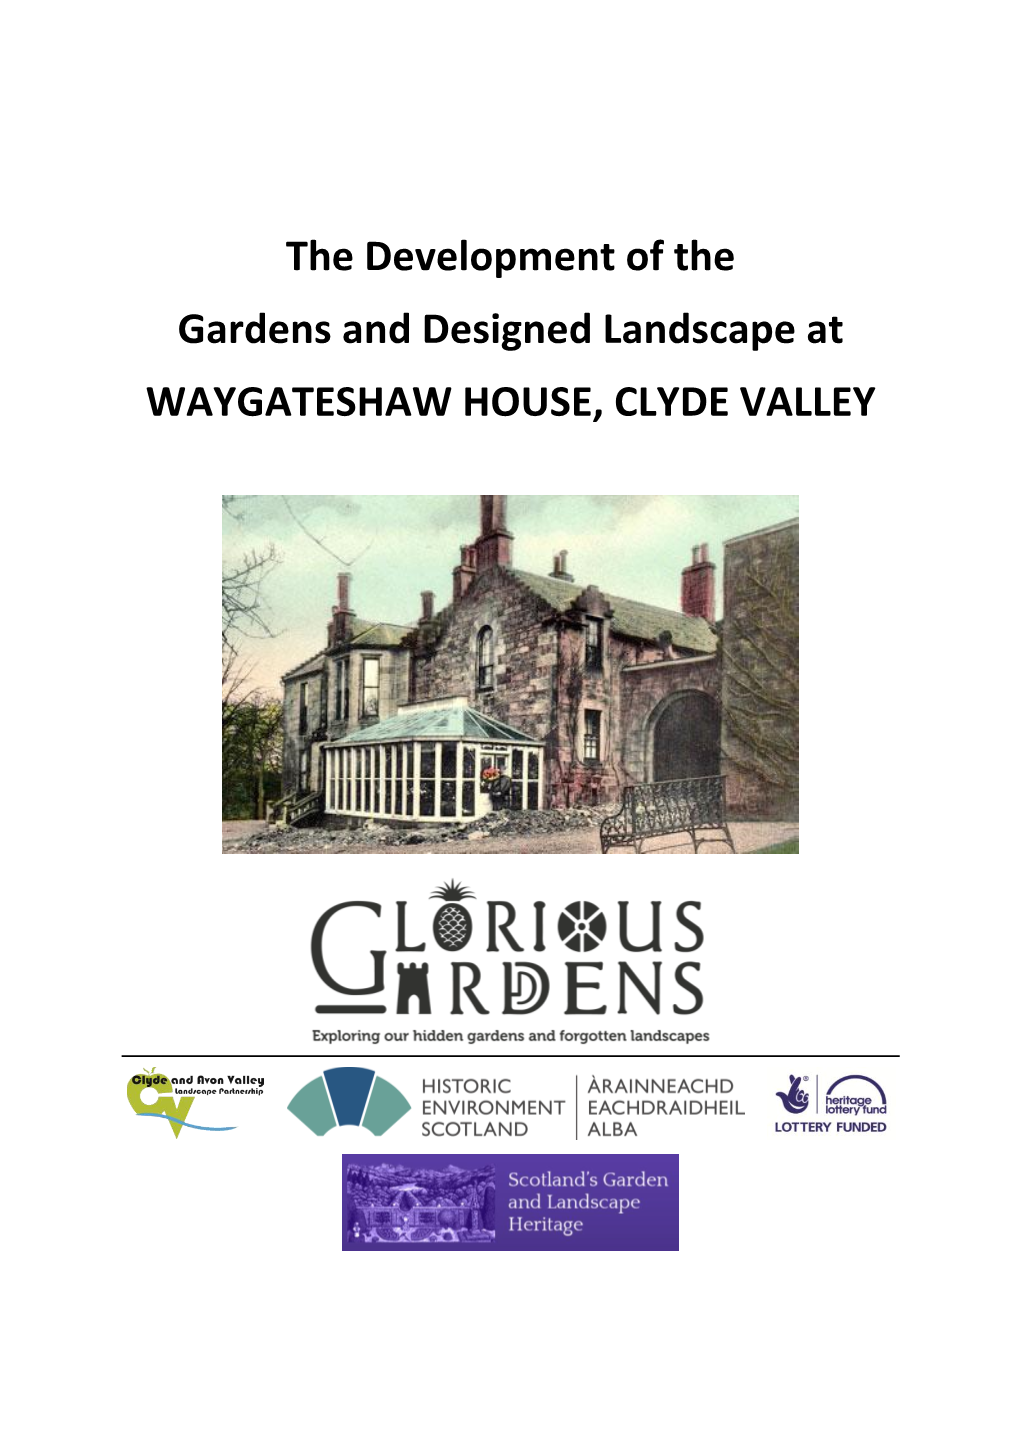 The Development of the Gardens and Designed Landscape at WAYGATESHAW HOUSE, CLYDE VALLEY